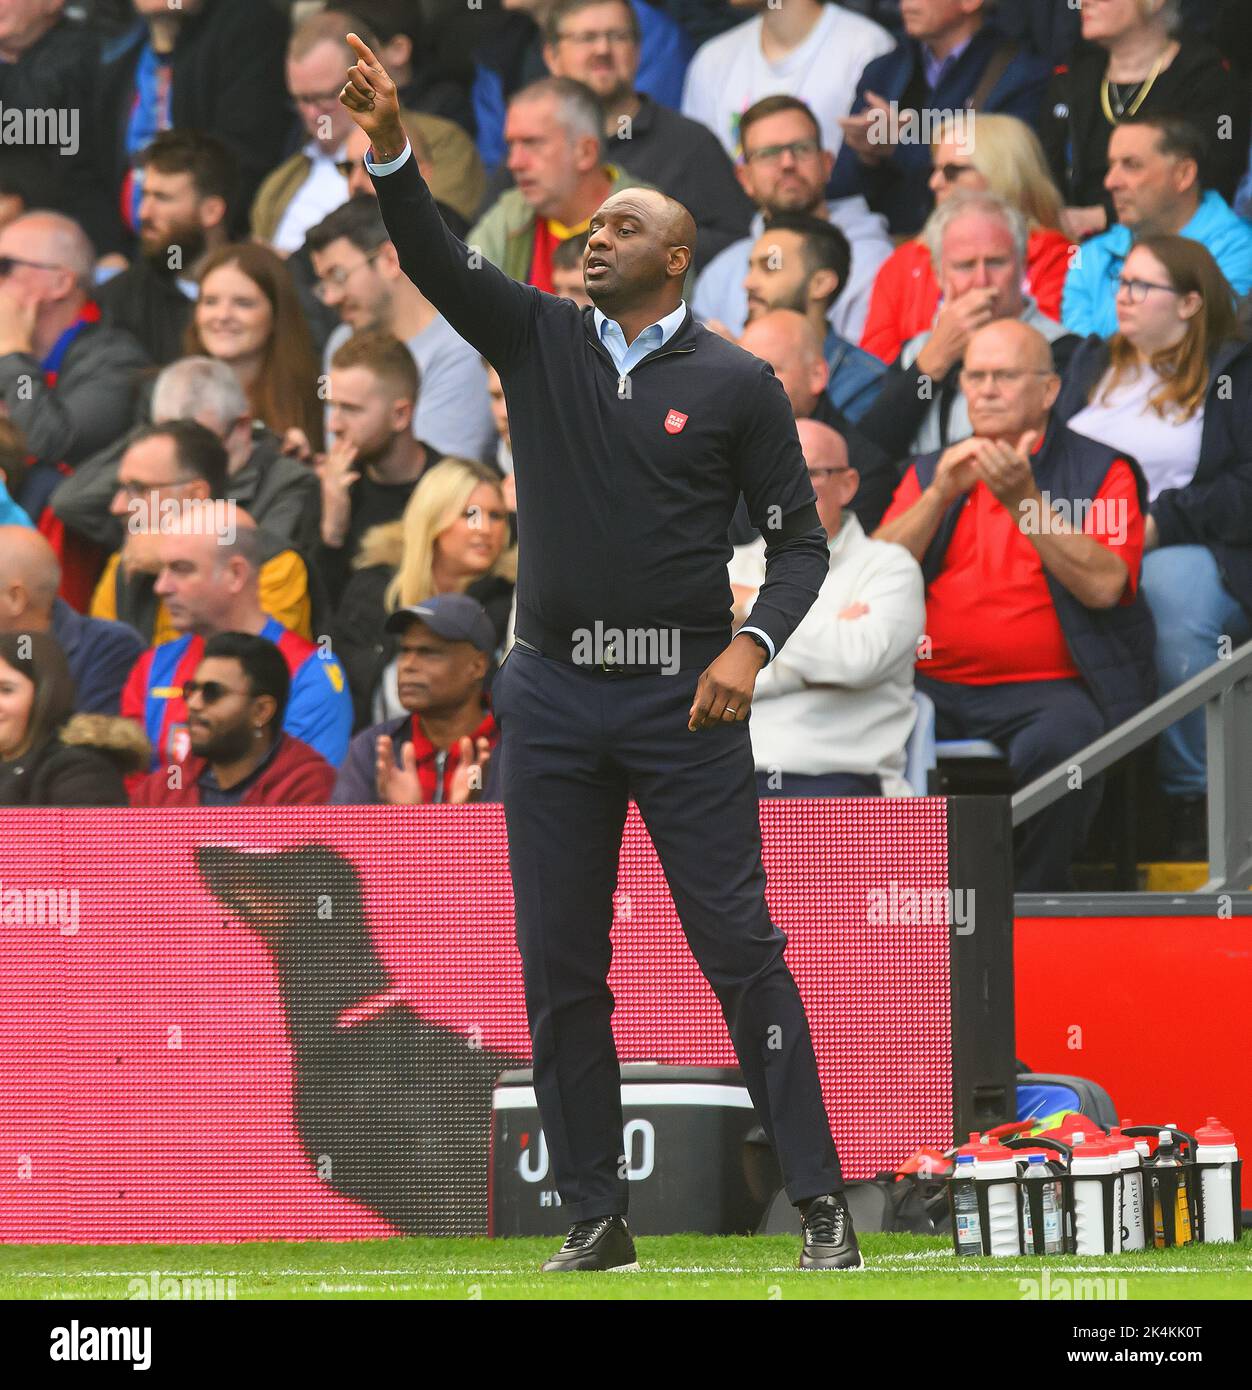 01 Oct 2022 - Crystal Palace v Chelsea - Premier League - Selhurst Park  Crystal Palace Manager Patrick Vieira during the Premier League match against Chelsea. Picture : Mark Pain / Alamy Live News Stock Photo